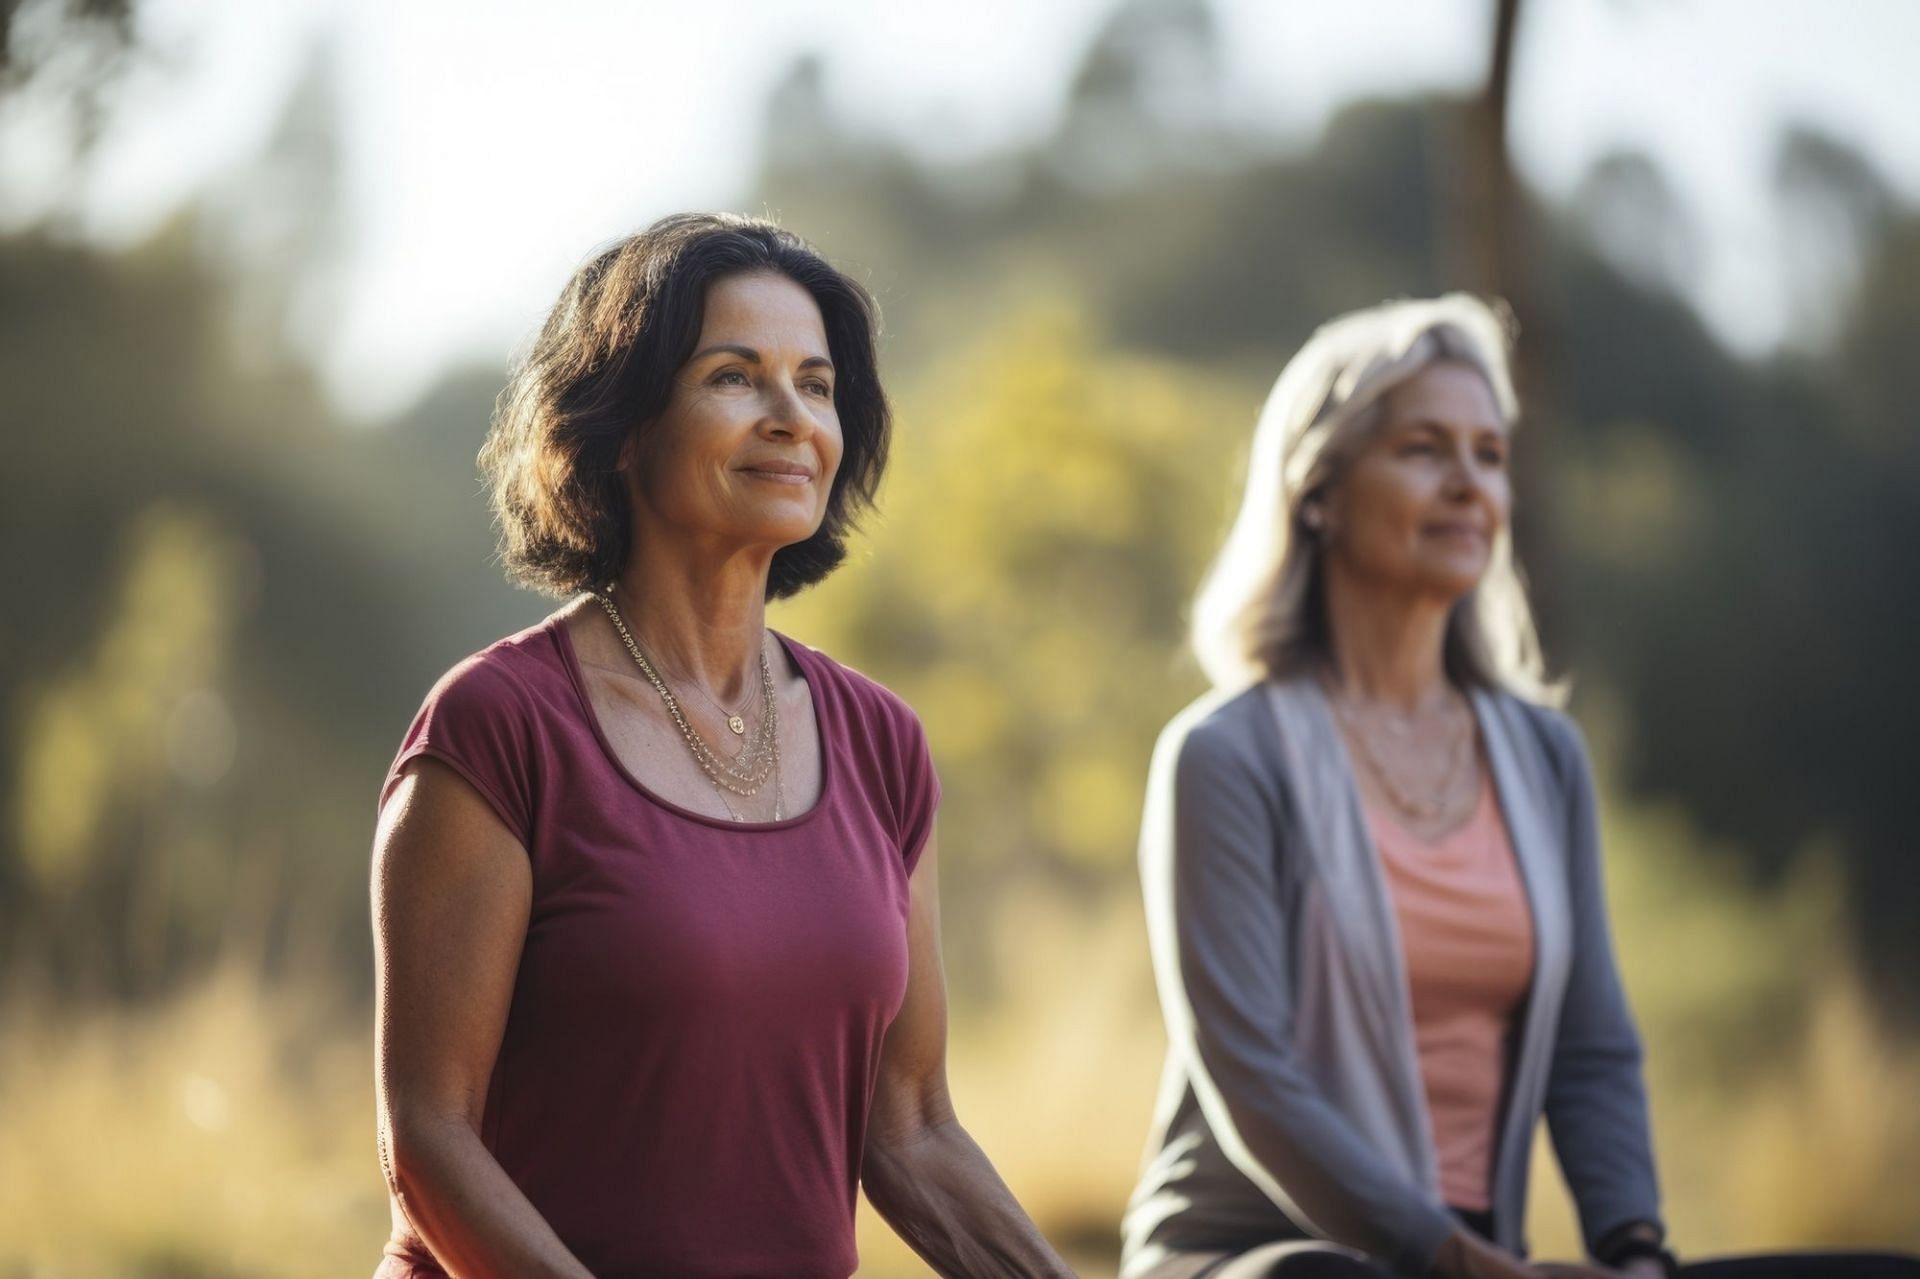 Depression in menopause is not an uncommon phenomenon, but not everyone goes though it. (Image via Freepik/Freepik)